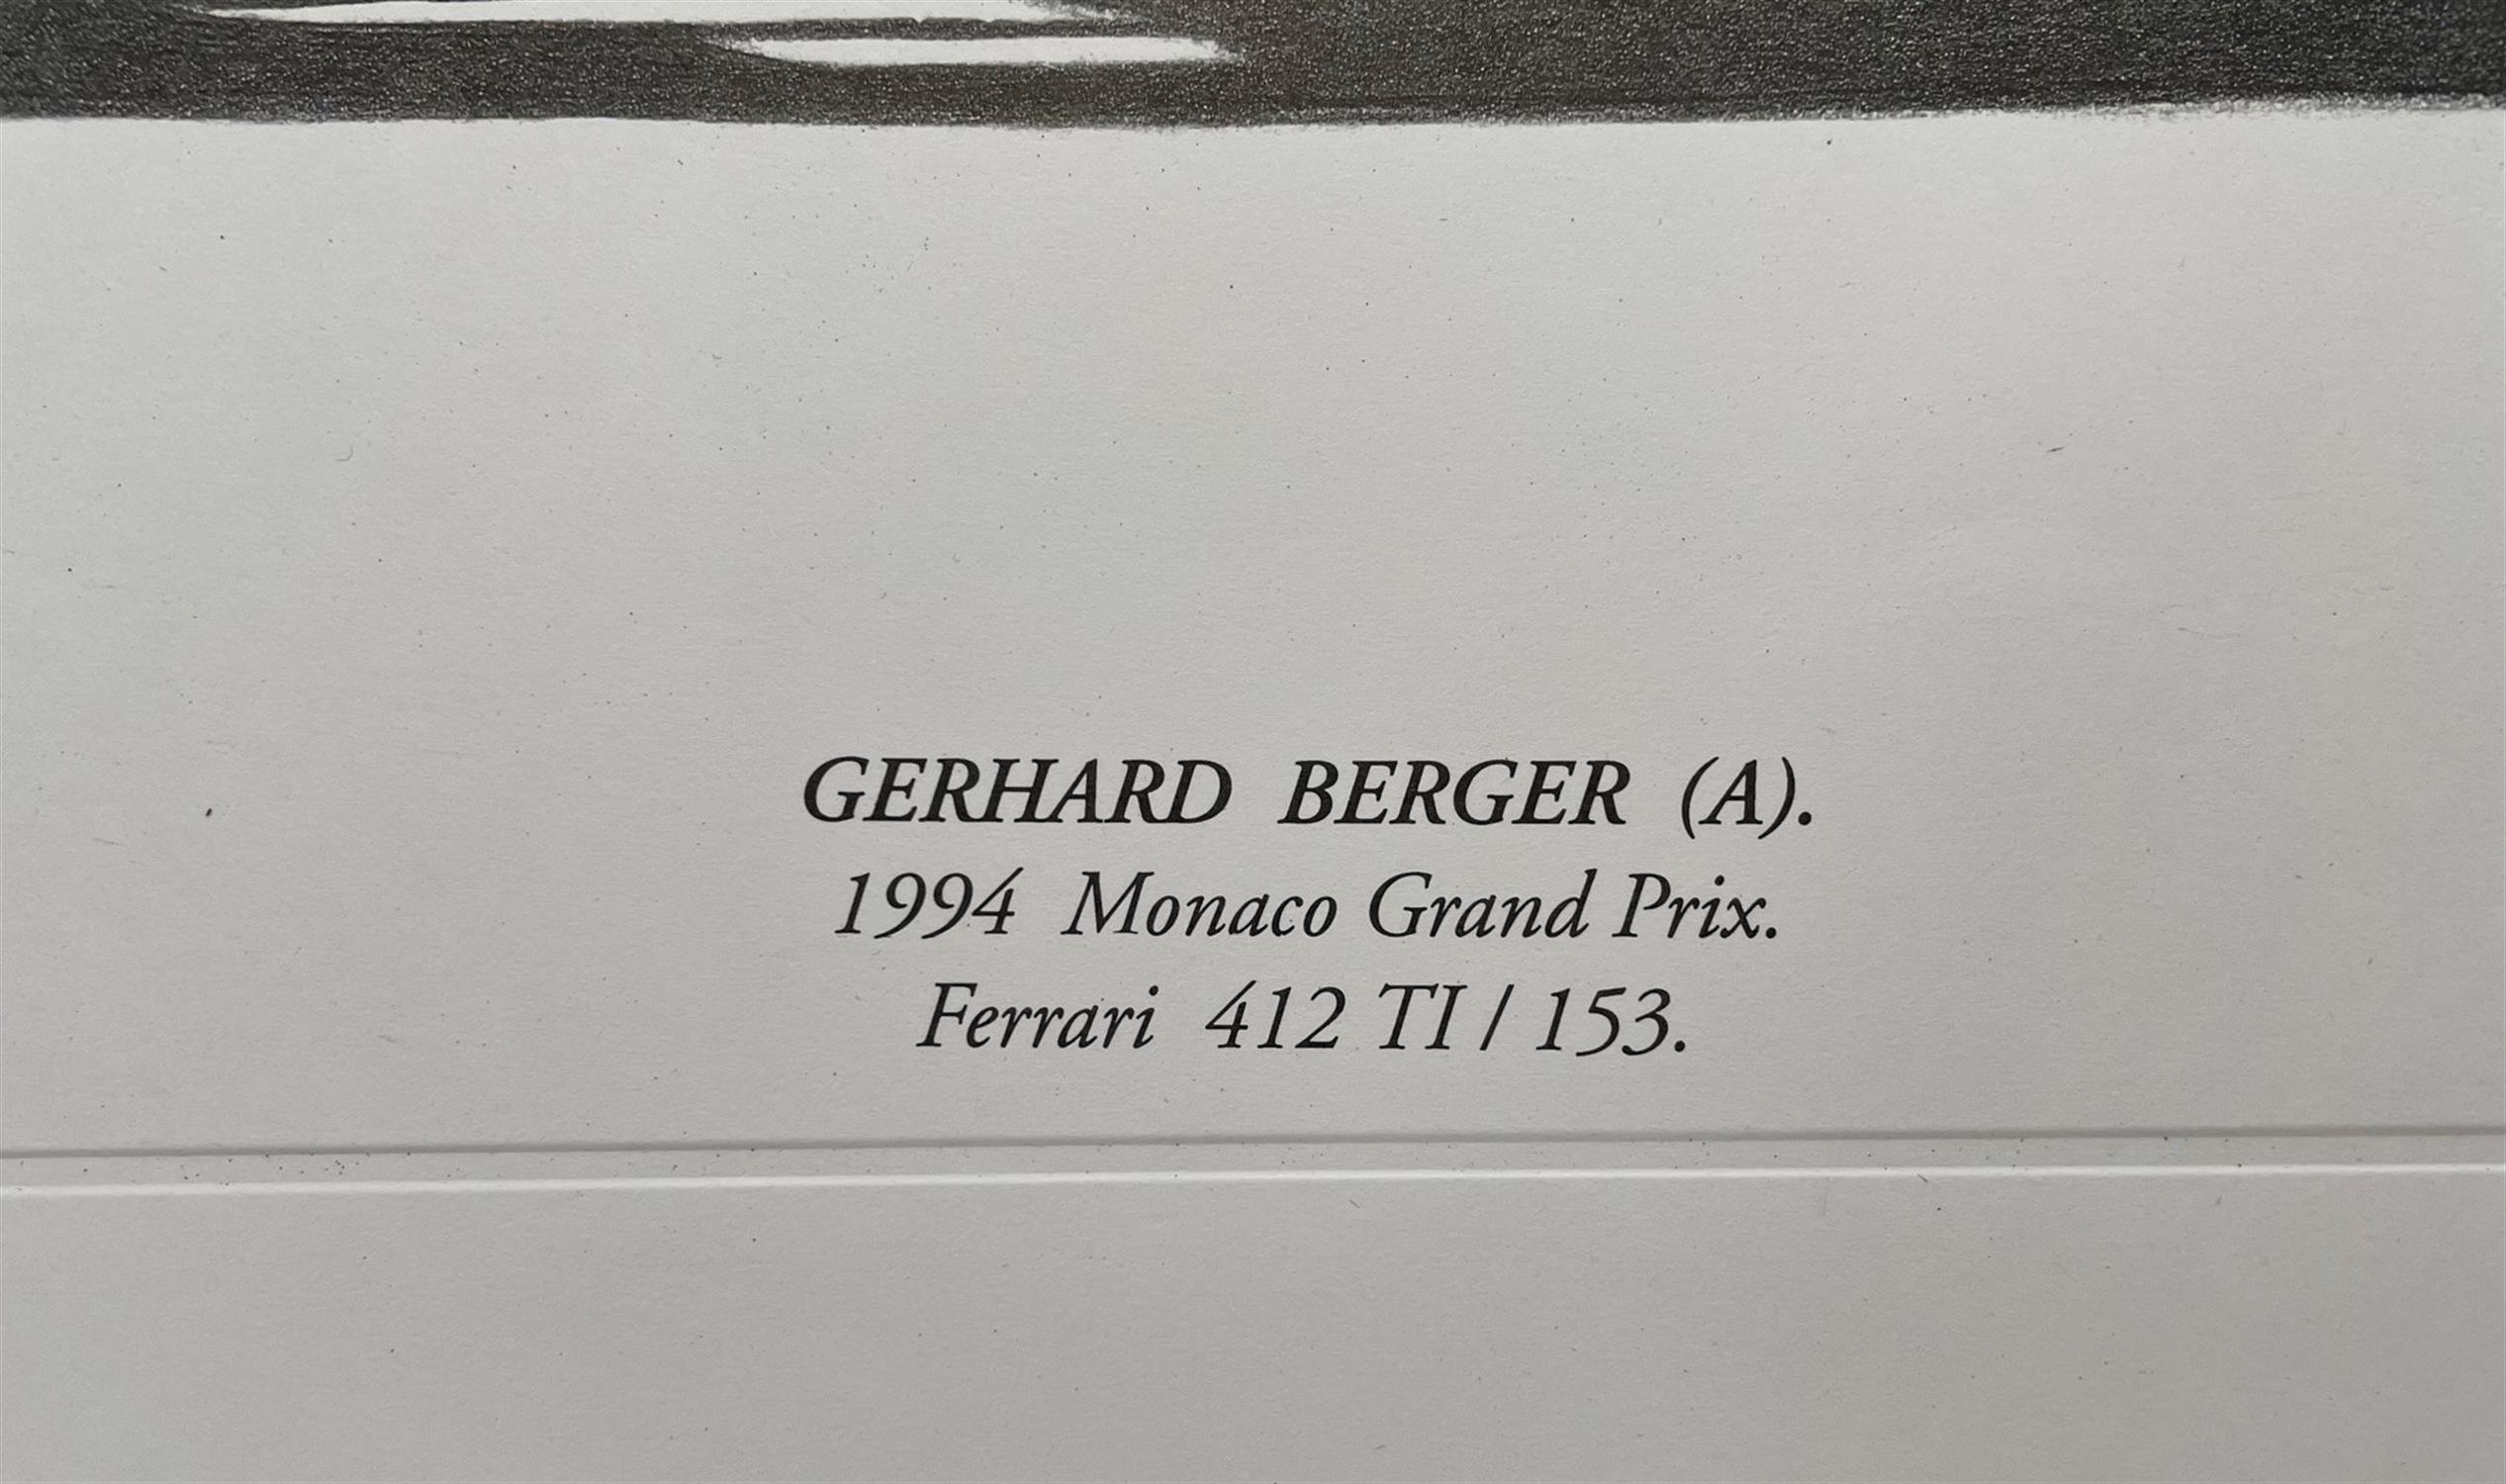 Limited Edition Print of Gerhard Berger. - Image 2 of 3